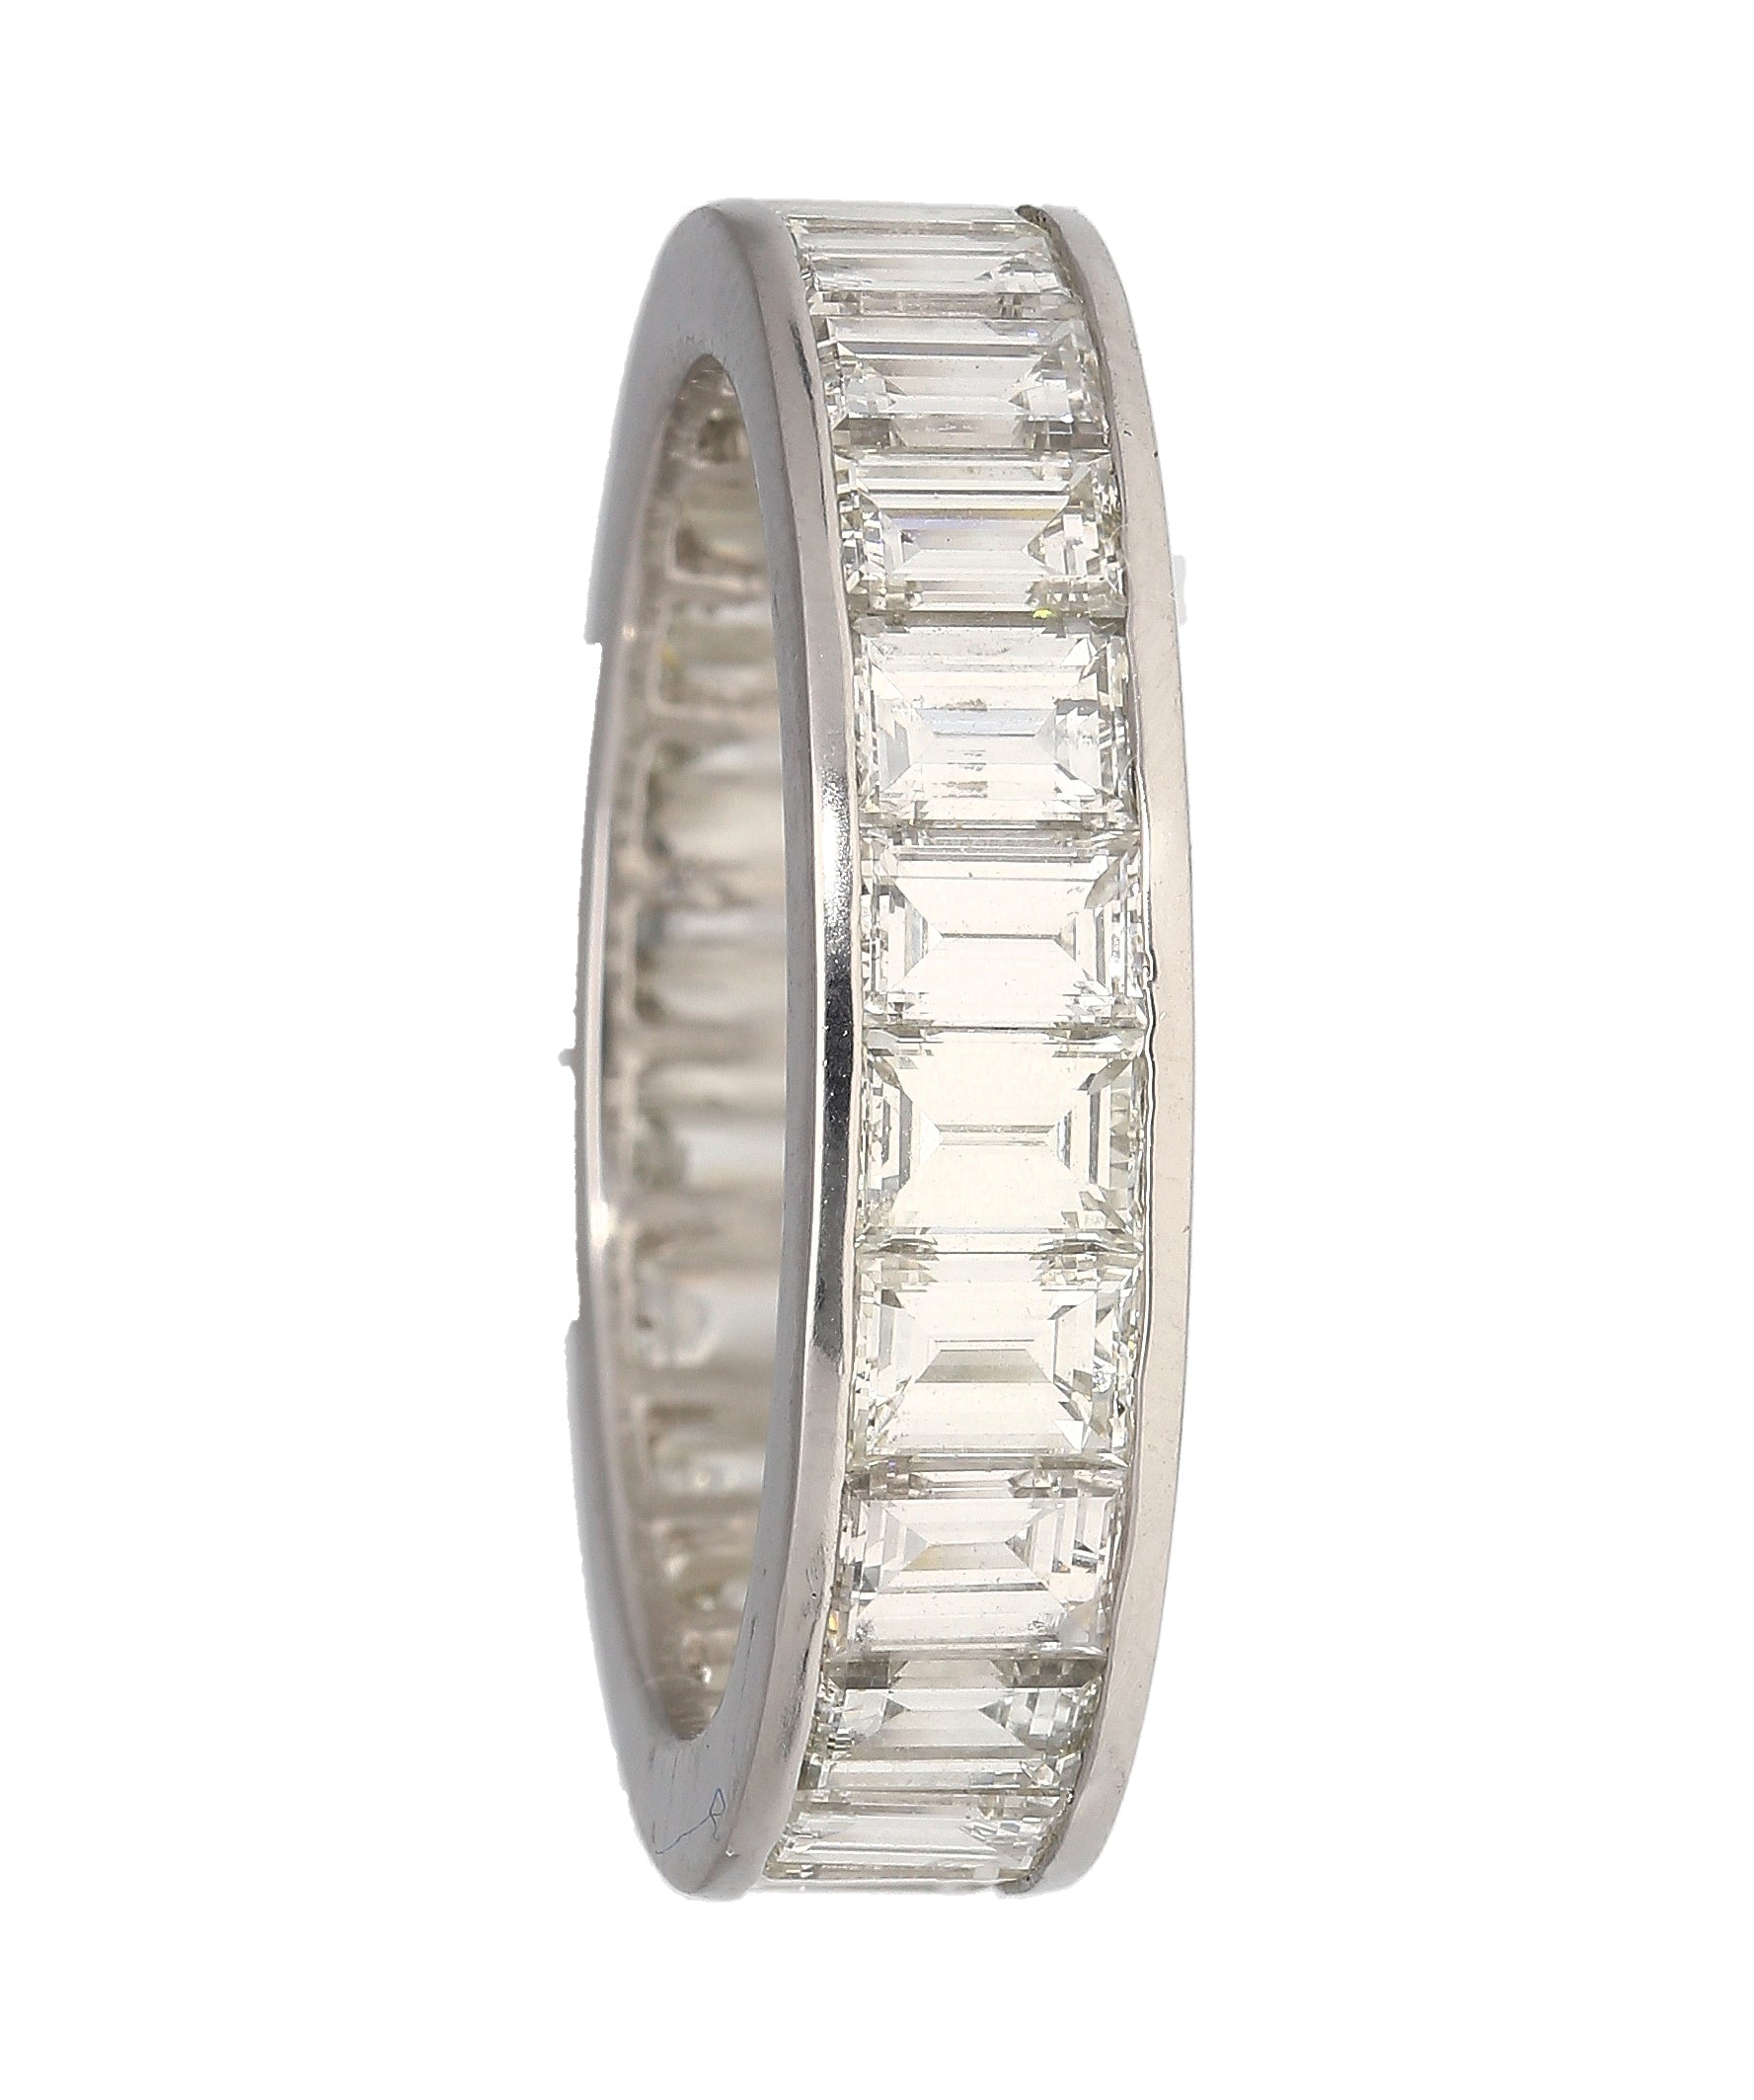 4-Carat-Baguette-Cut-Natural-Diamond-Wedding-Band-Ring-in-Platinum-Channel-Setting-Band-2.jpg